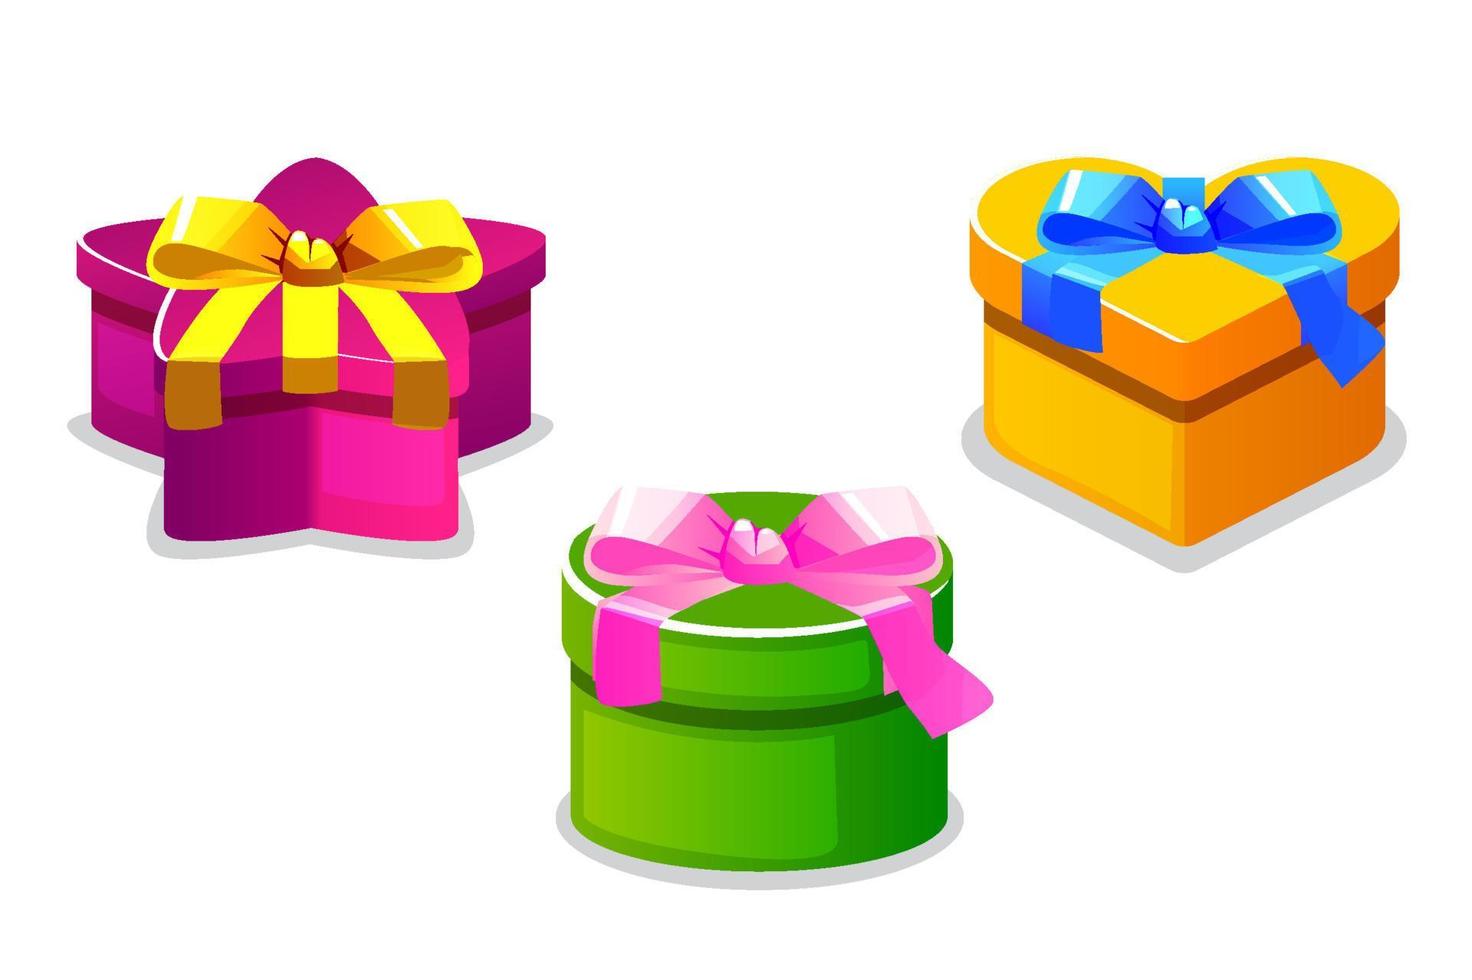 Gifts boxes closed different shapes and colors isolated for the game. Vector illustration set bright gifts heart, star and circle shapes with bow.